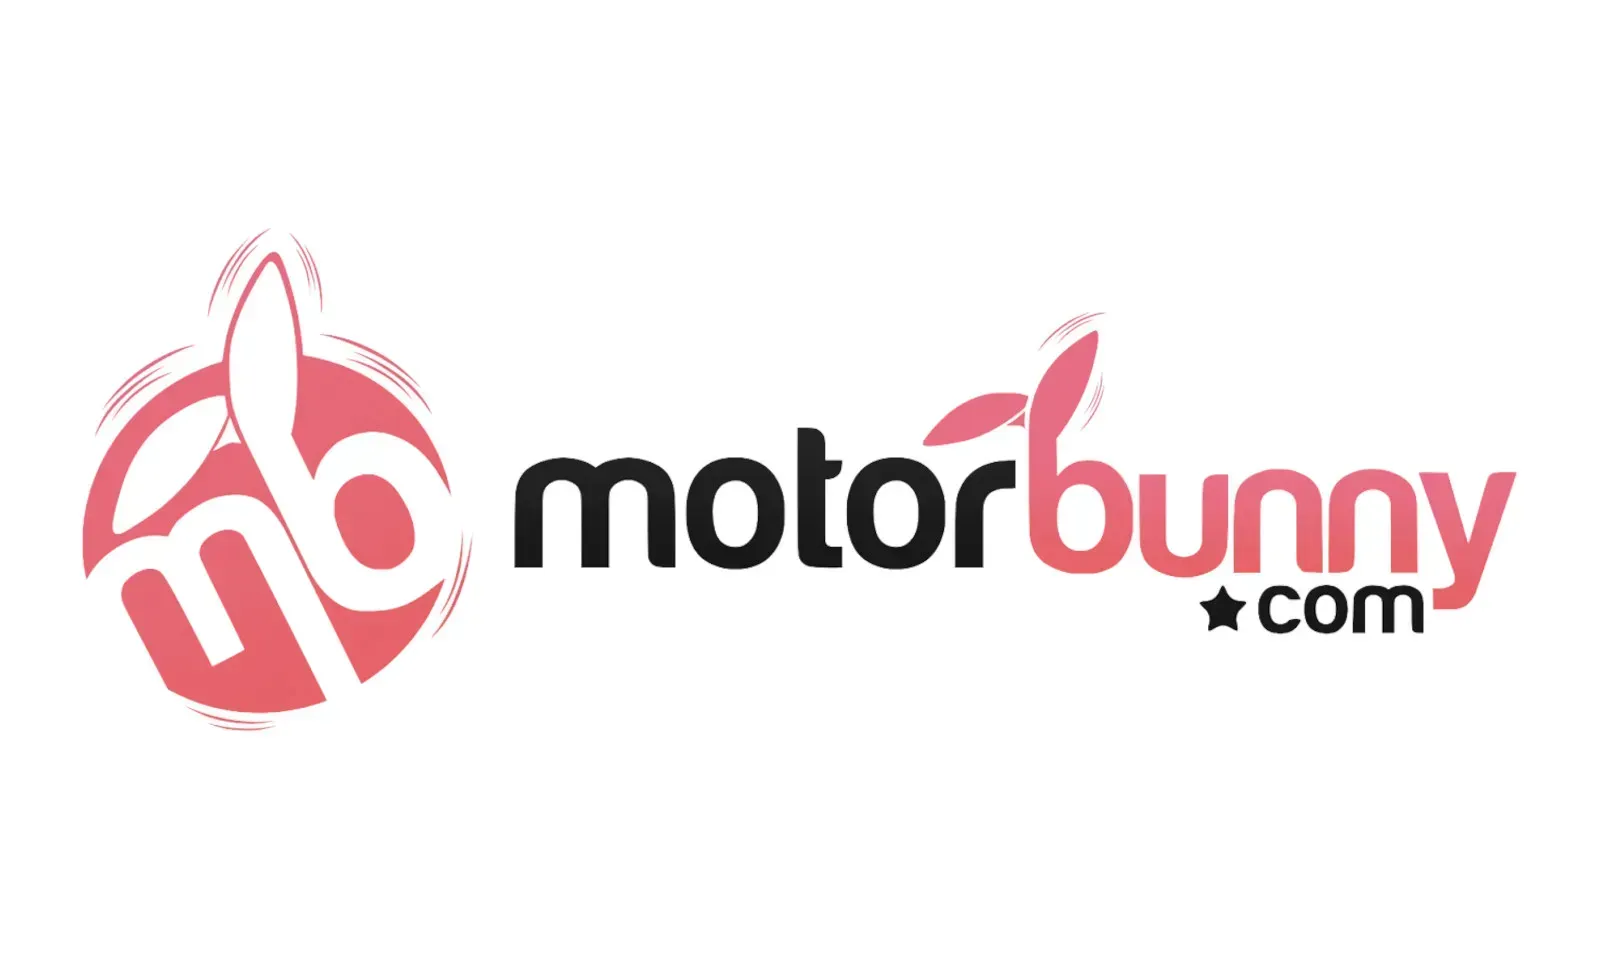 Motorbunny Announces Attendance at AVN Expo